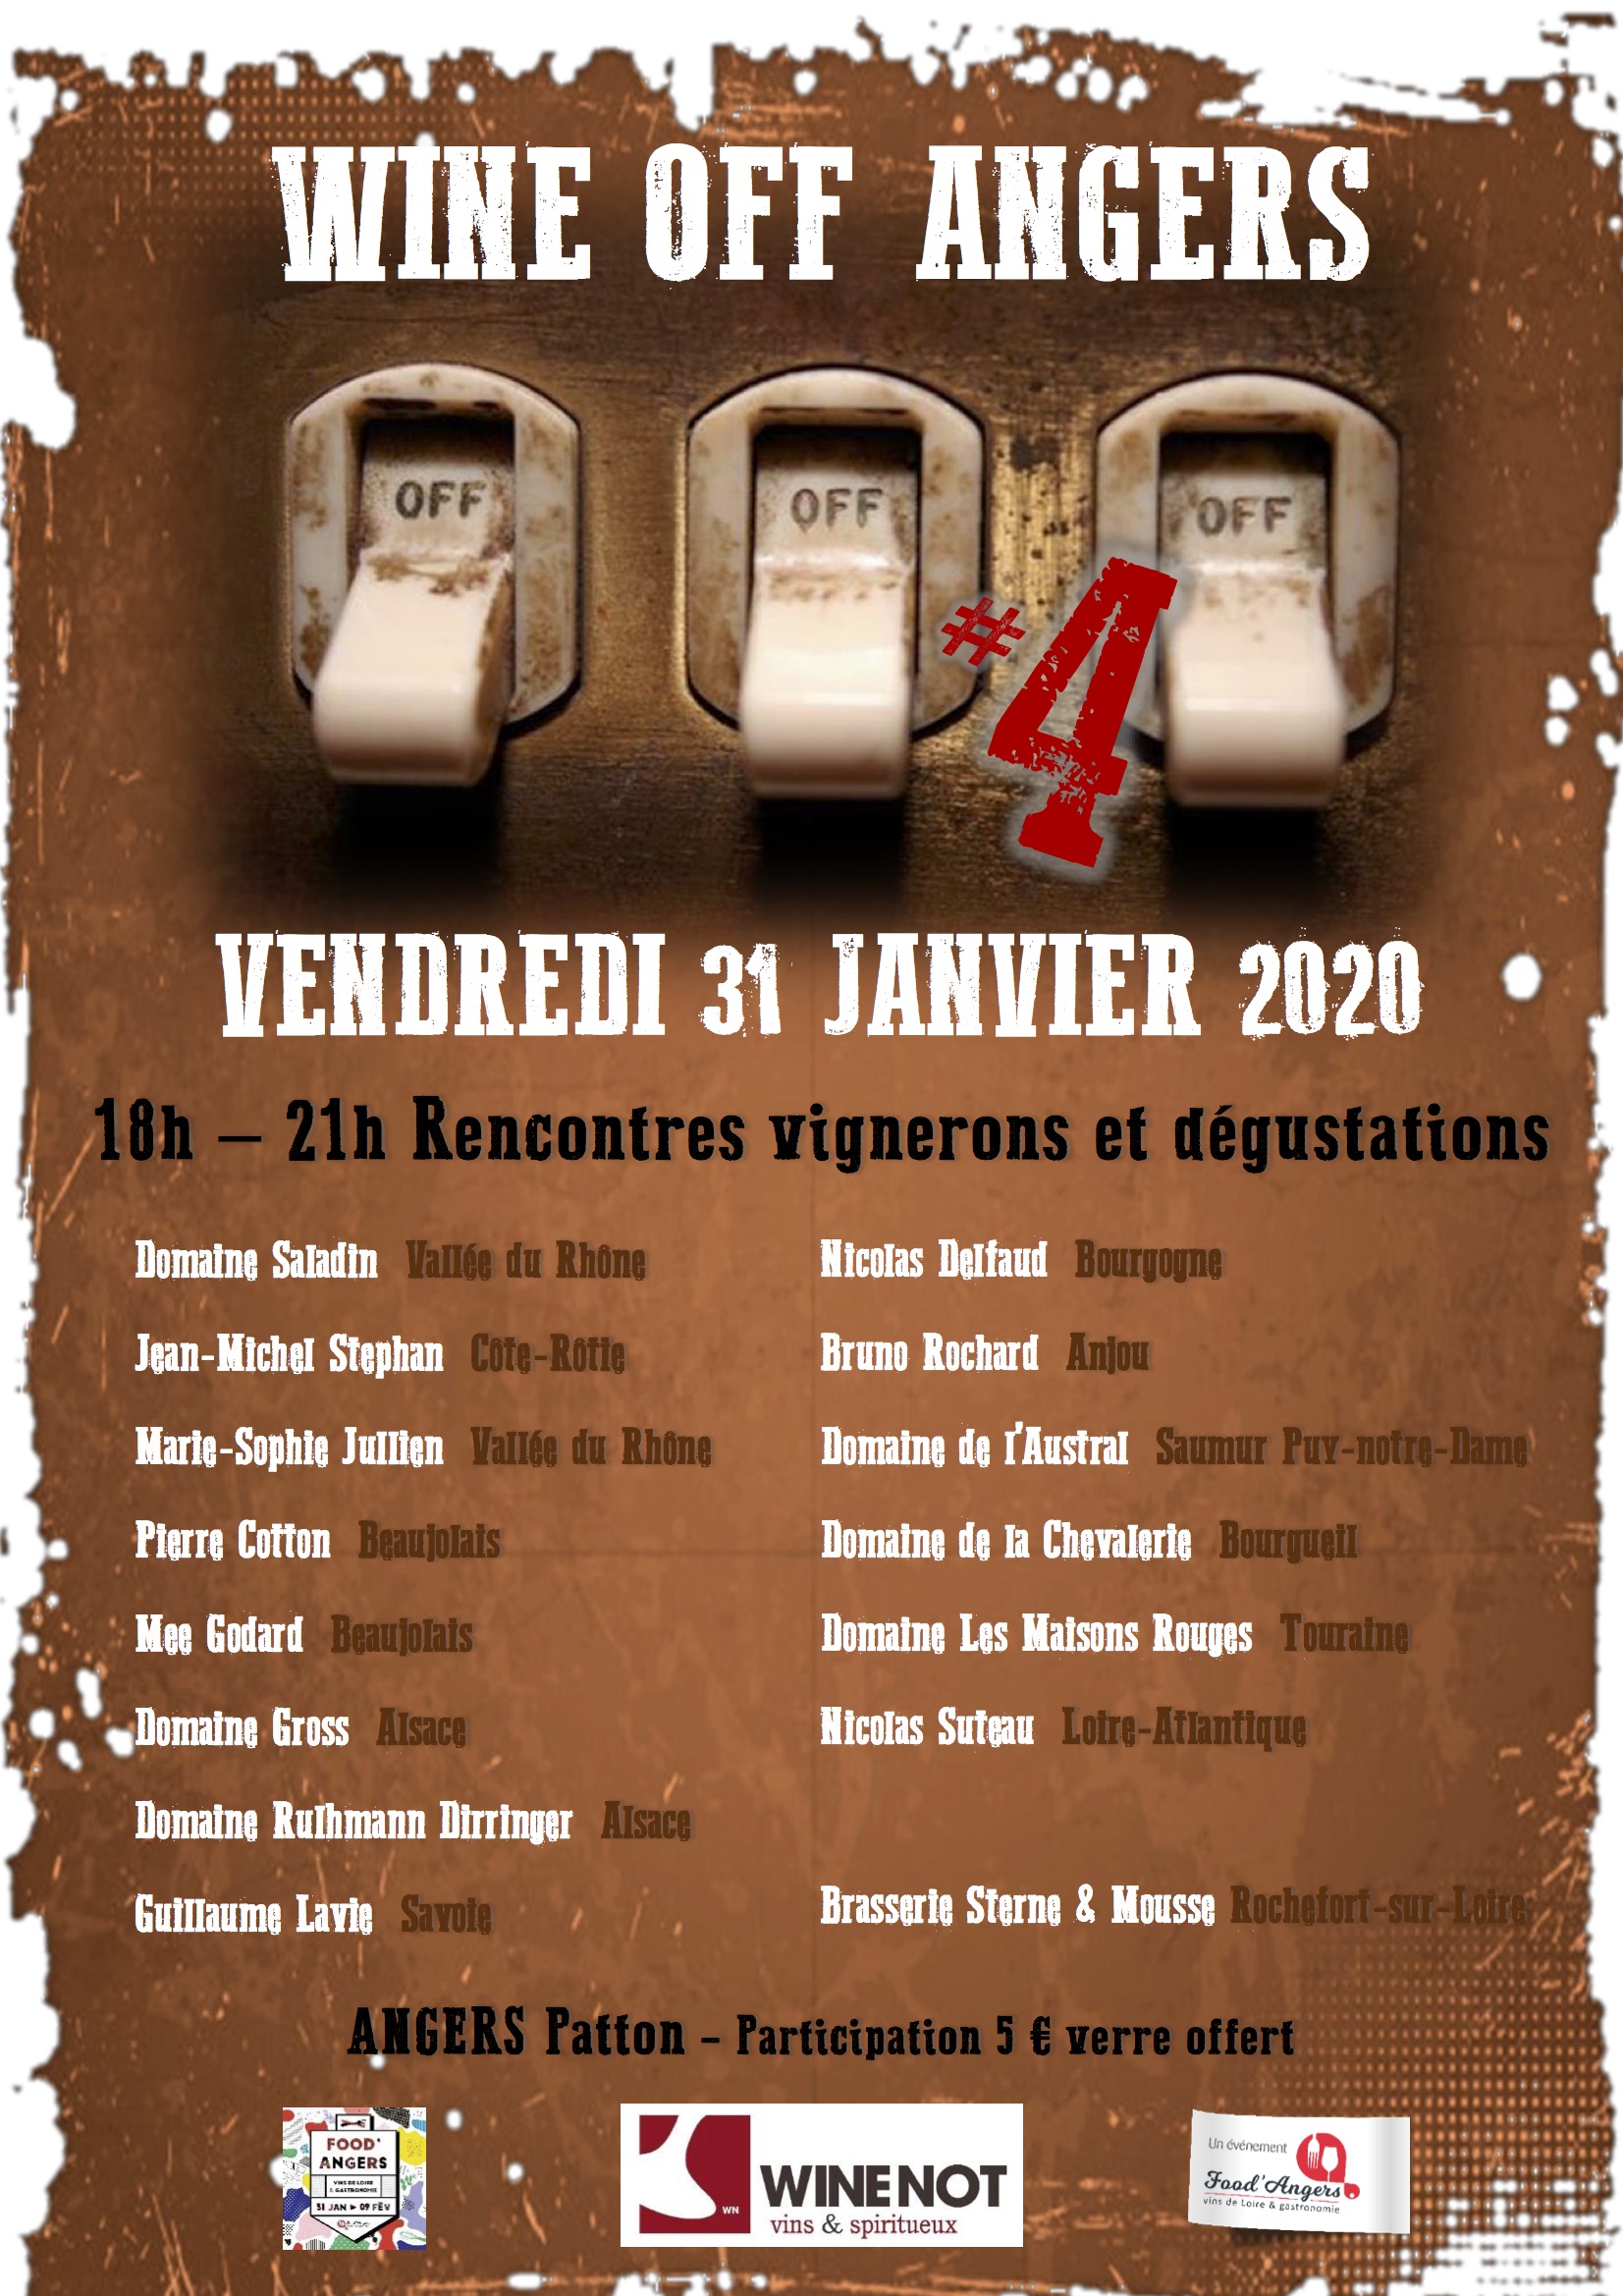 WINE OFF 4 Angers AFFICHE